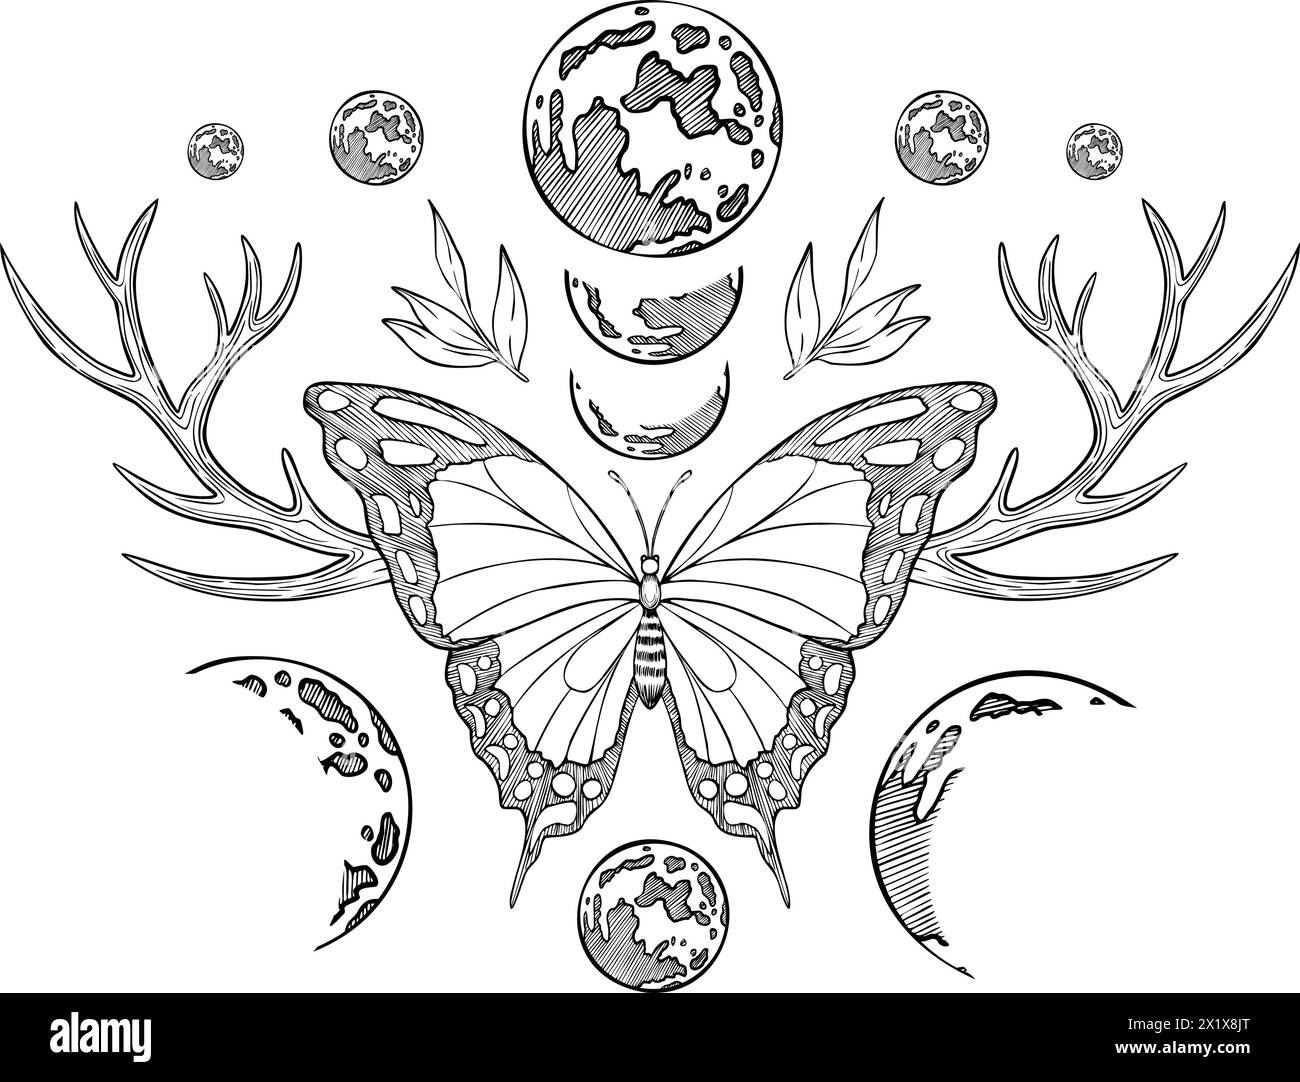 Butterfly with moons and deer horns. Vector lustration of an insect with wings and antlers in a magical celestial composition. Magical drawing in linear style for tattoo. Vintage esoteric print. Stock Vector